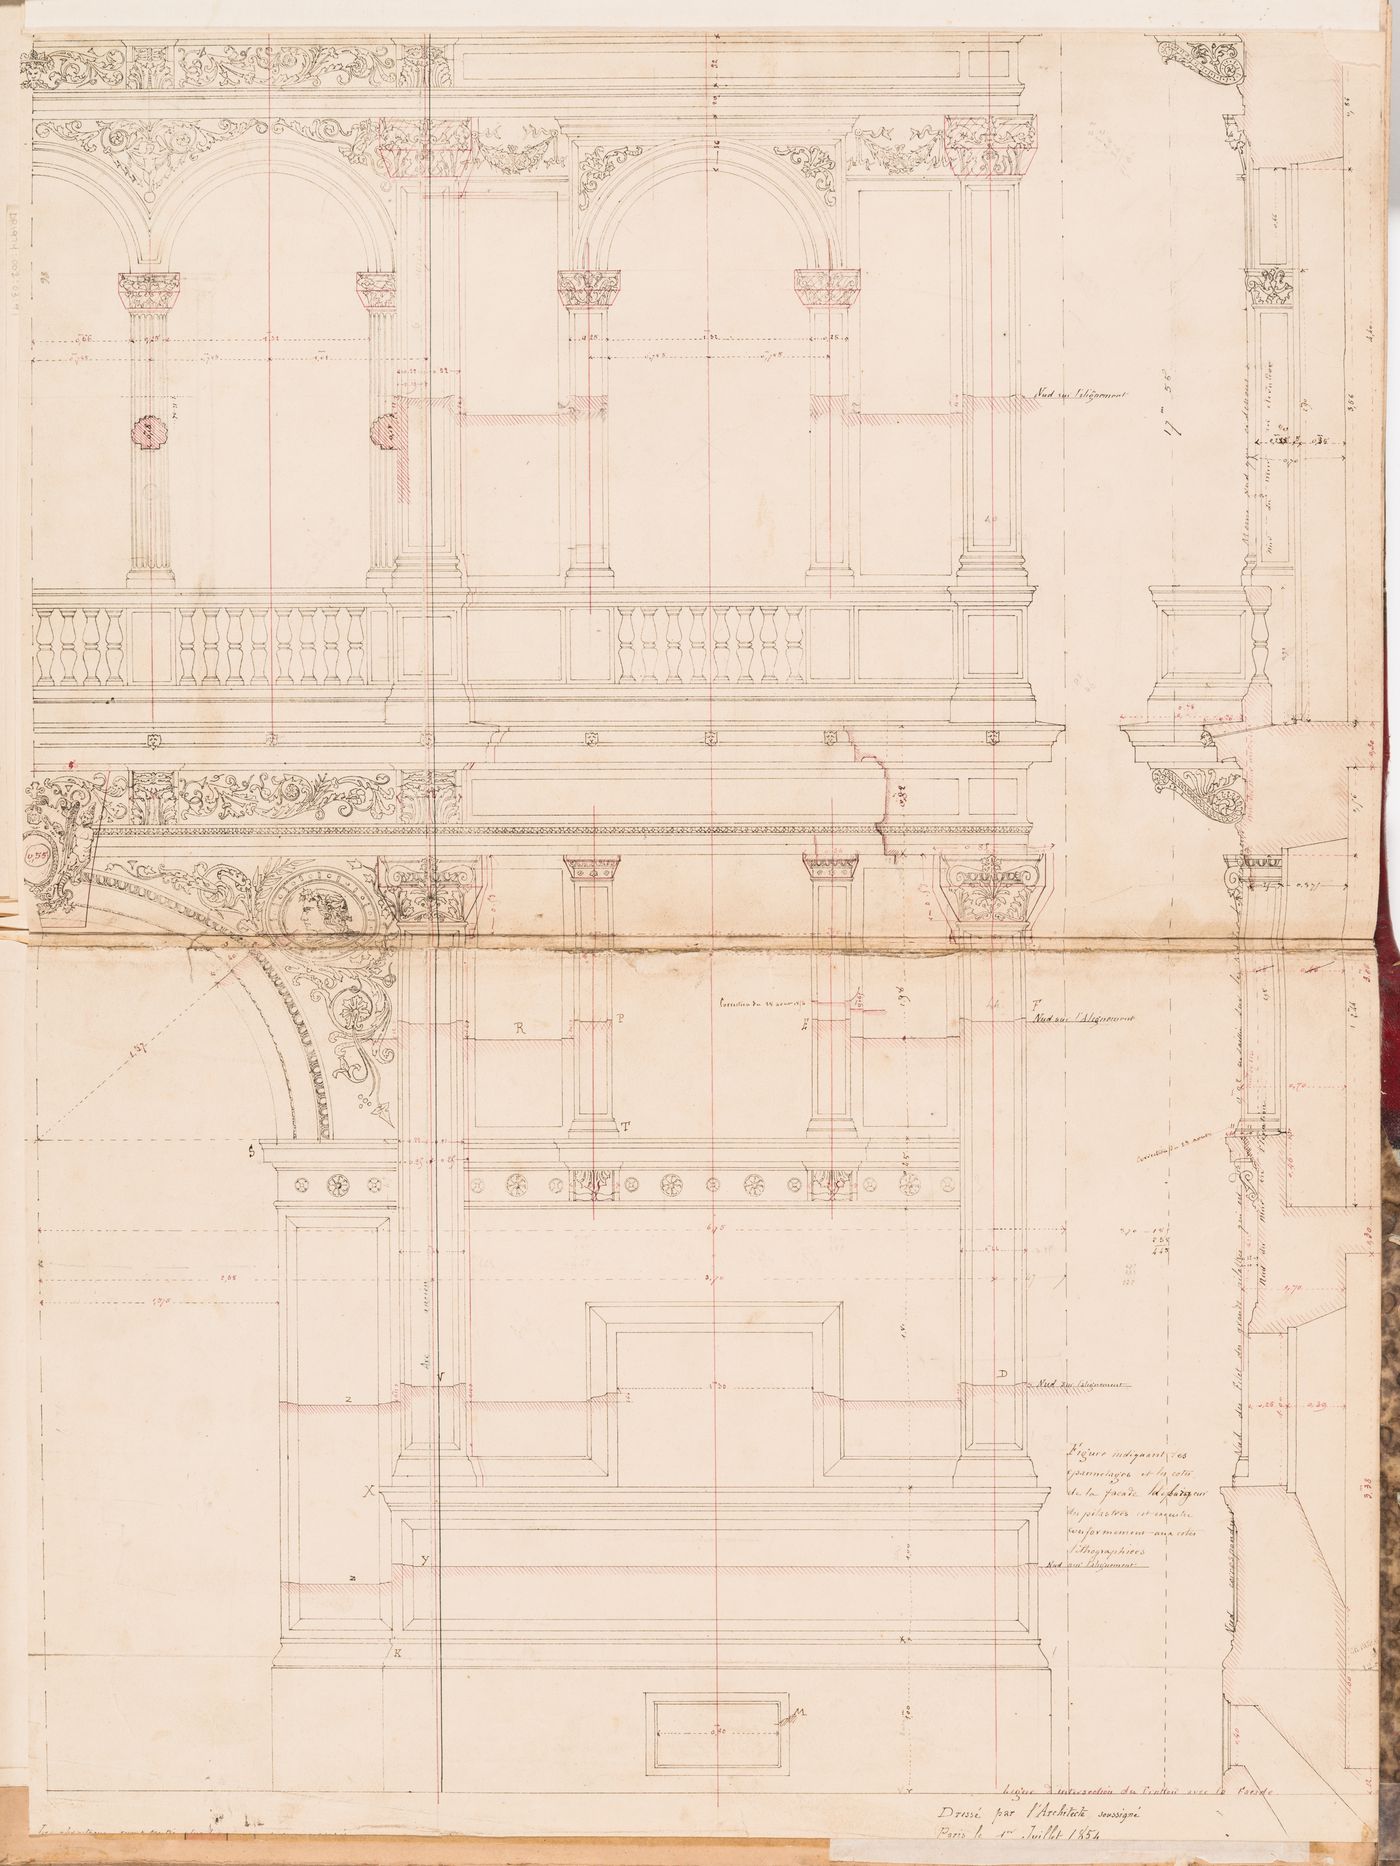 Half elevation, wall section and profile for the principal façade indicating the form of the rough cut stone, Hôtel Soltykoff; verso: Roof section, Hôtel Soltykoff